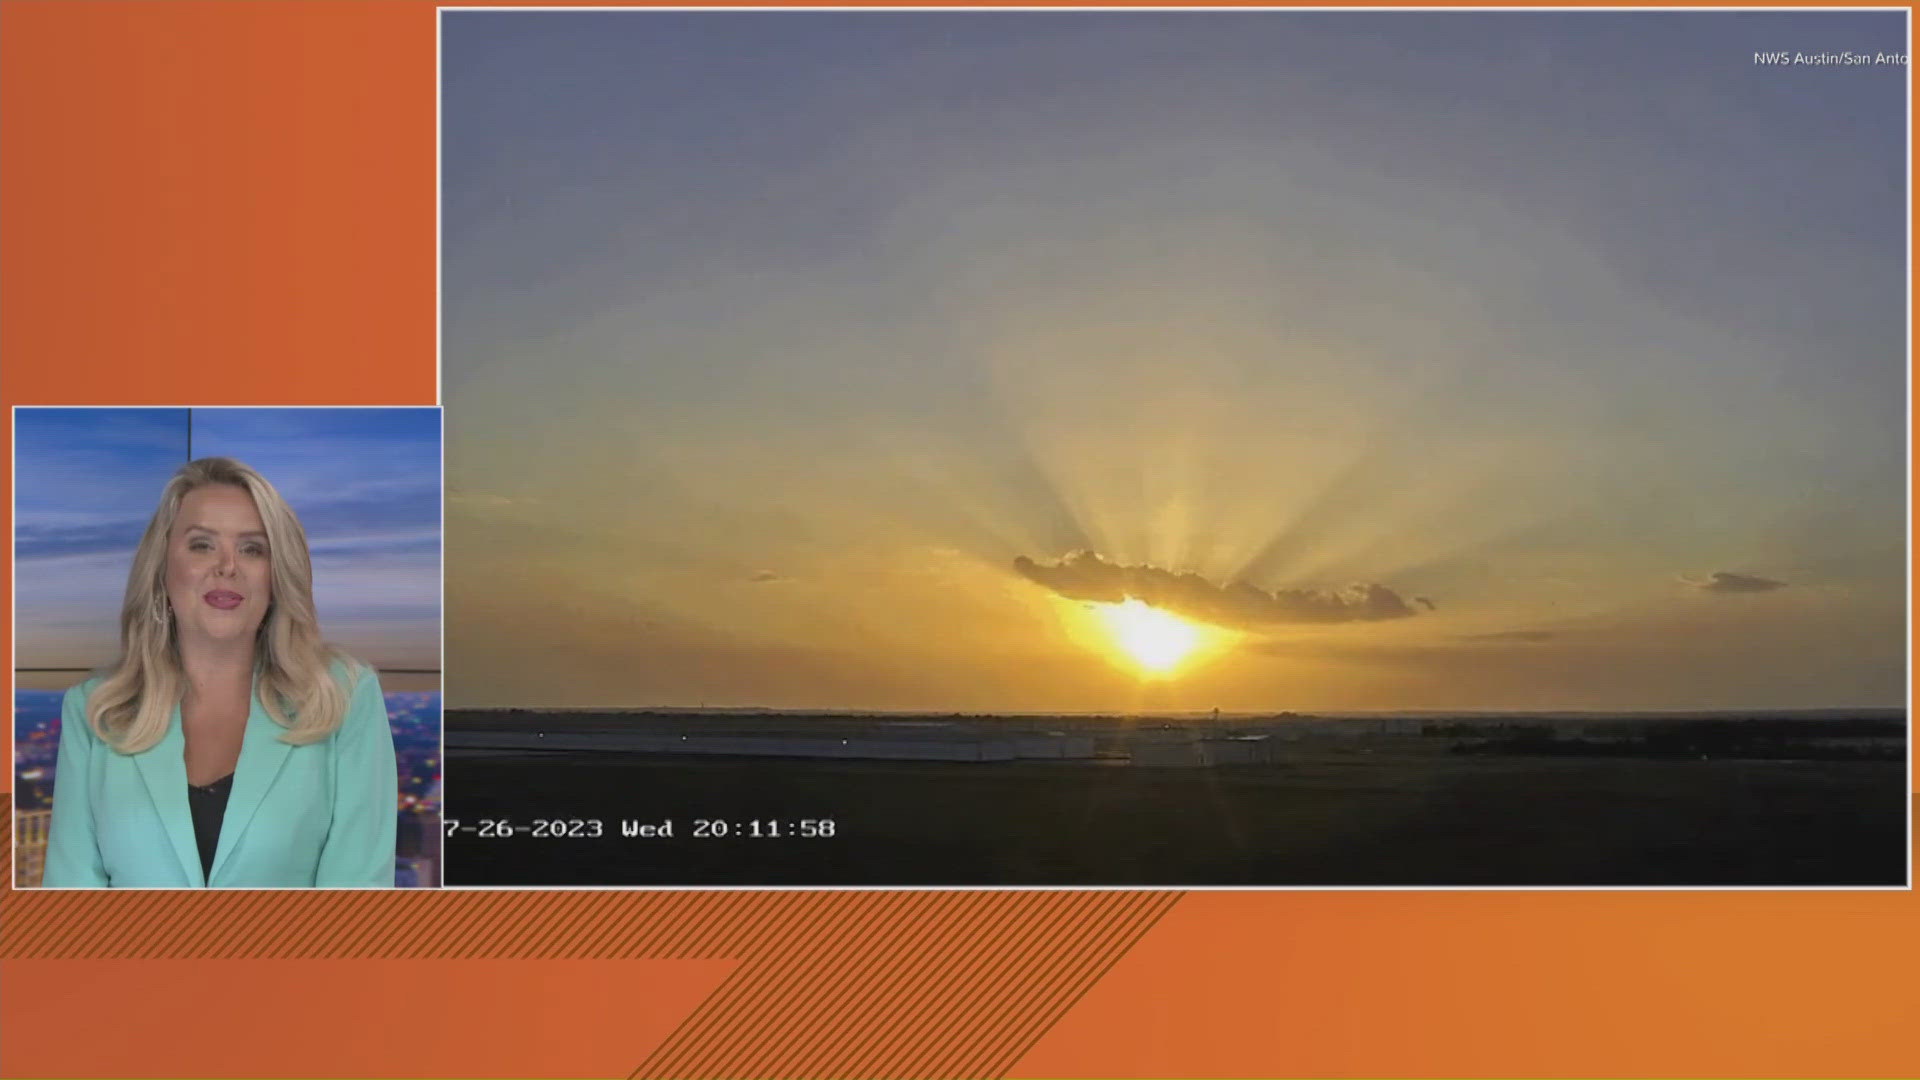 The Saharan Dust should bring extra bright sunrises and sunsets this week. You can share your sky photos with us using the "near me" button on KVUE's app.